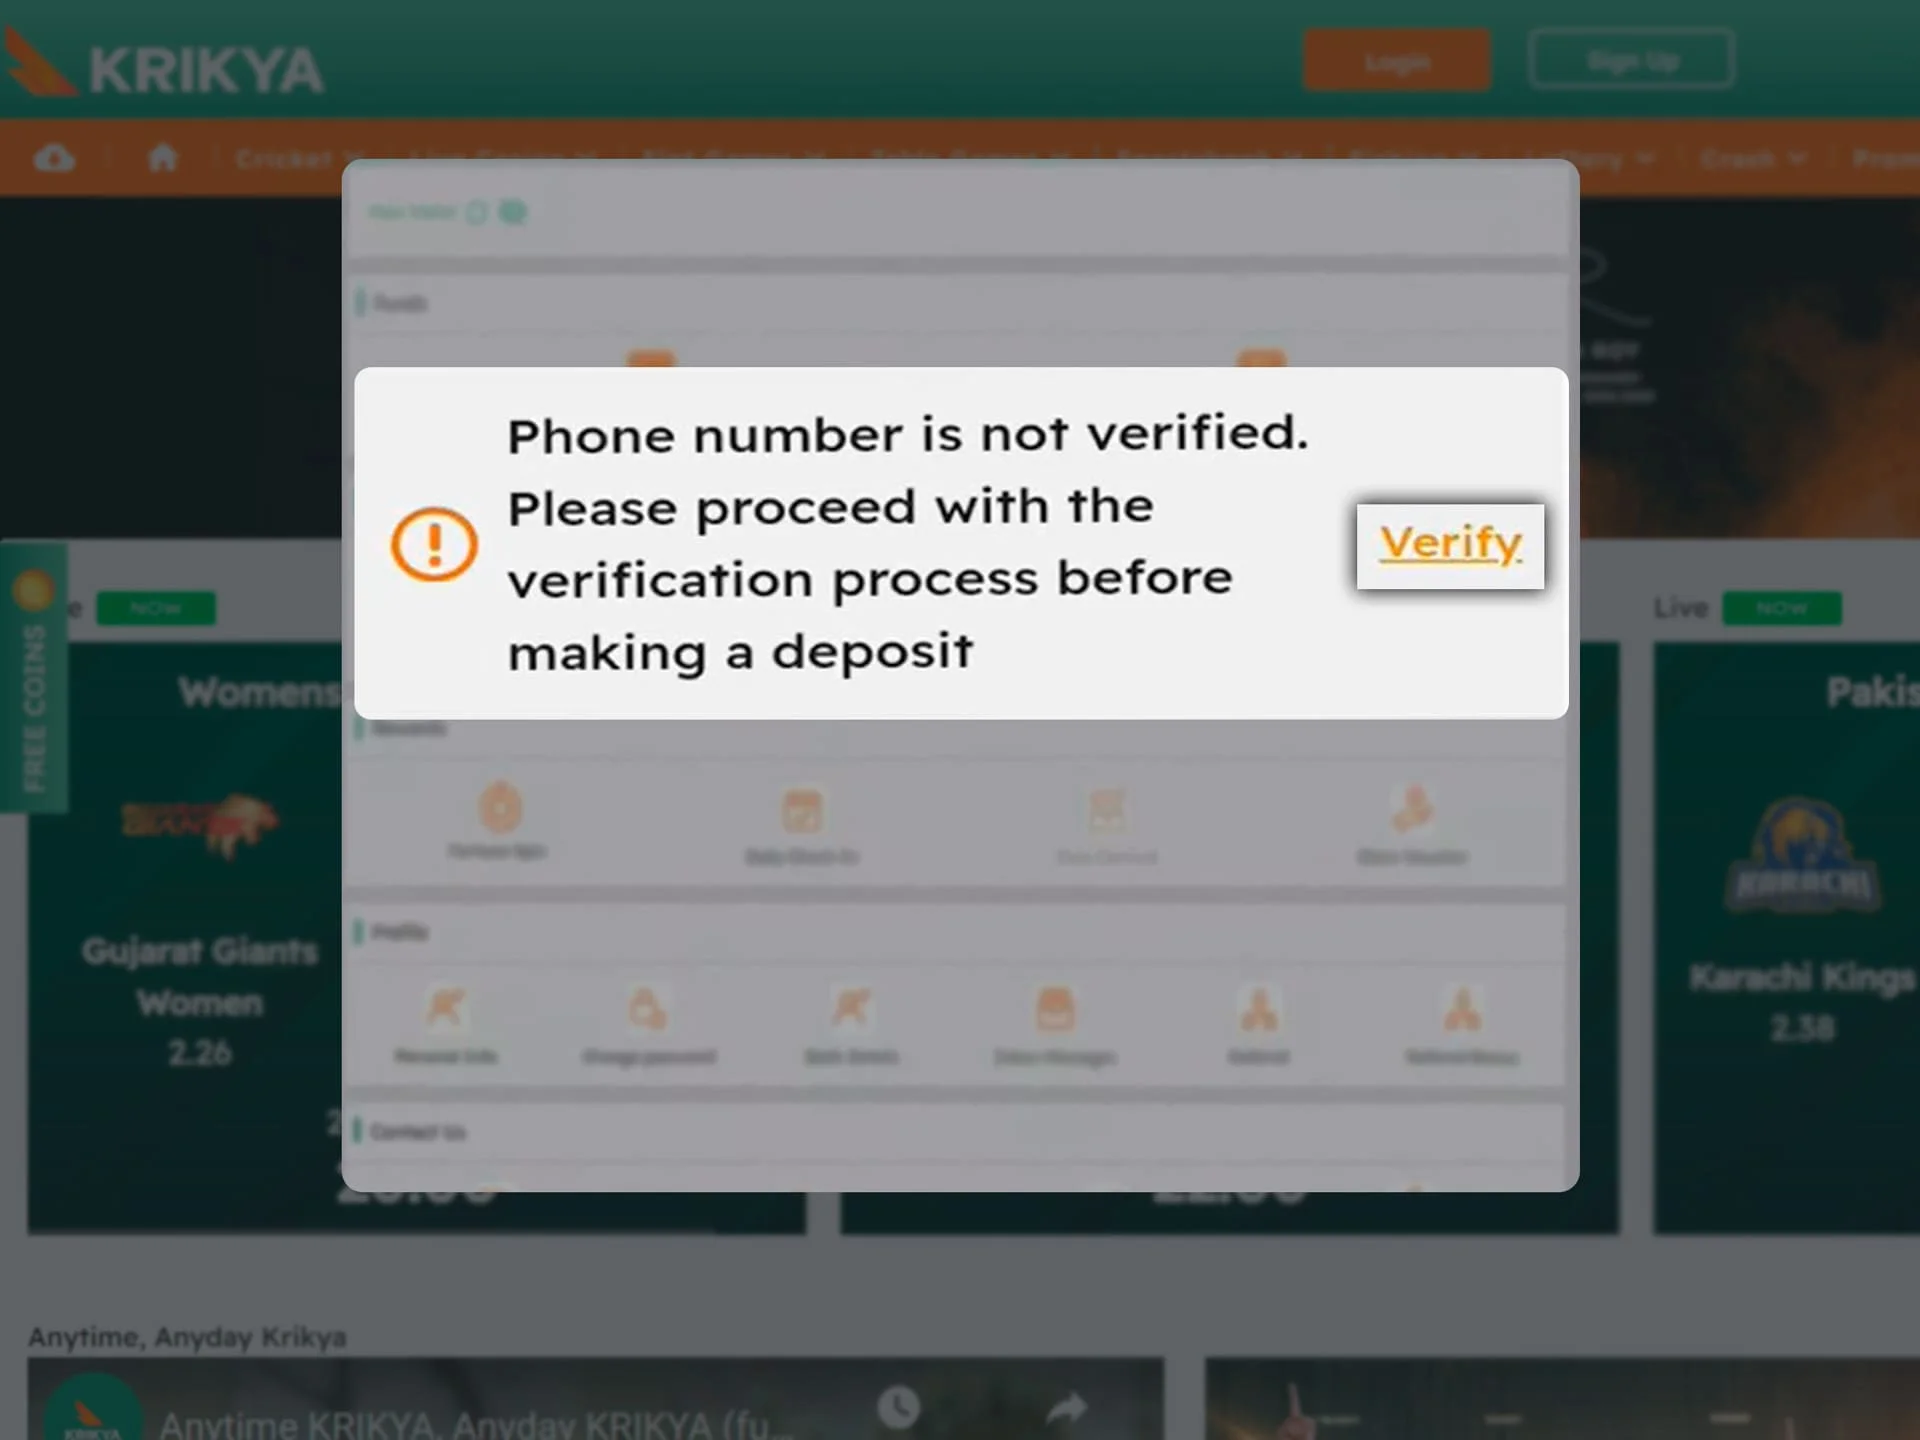 Go through the process of verifying your Krikya account.